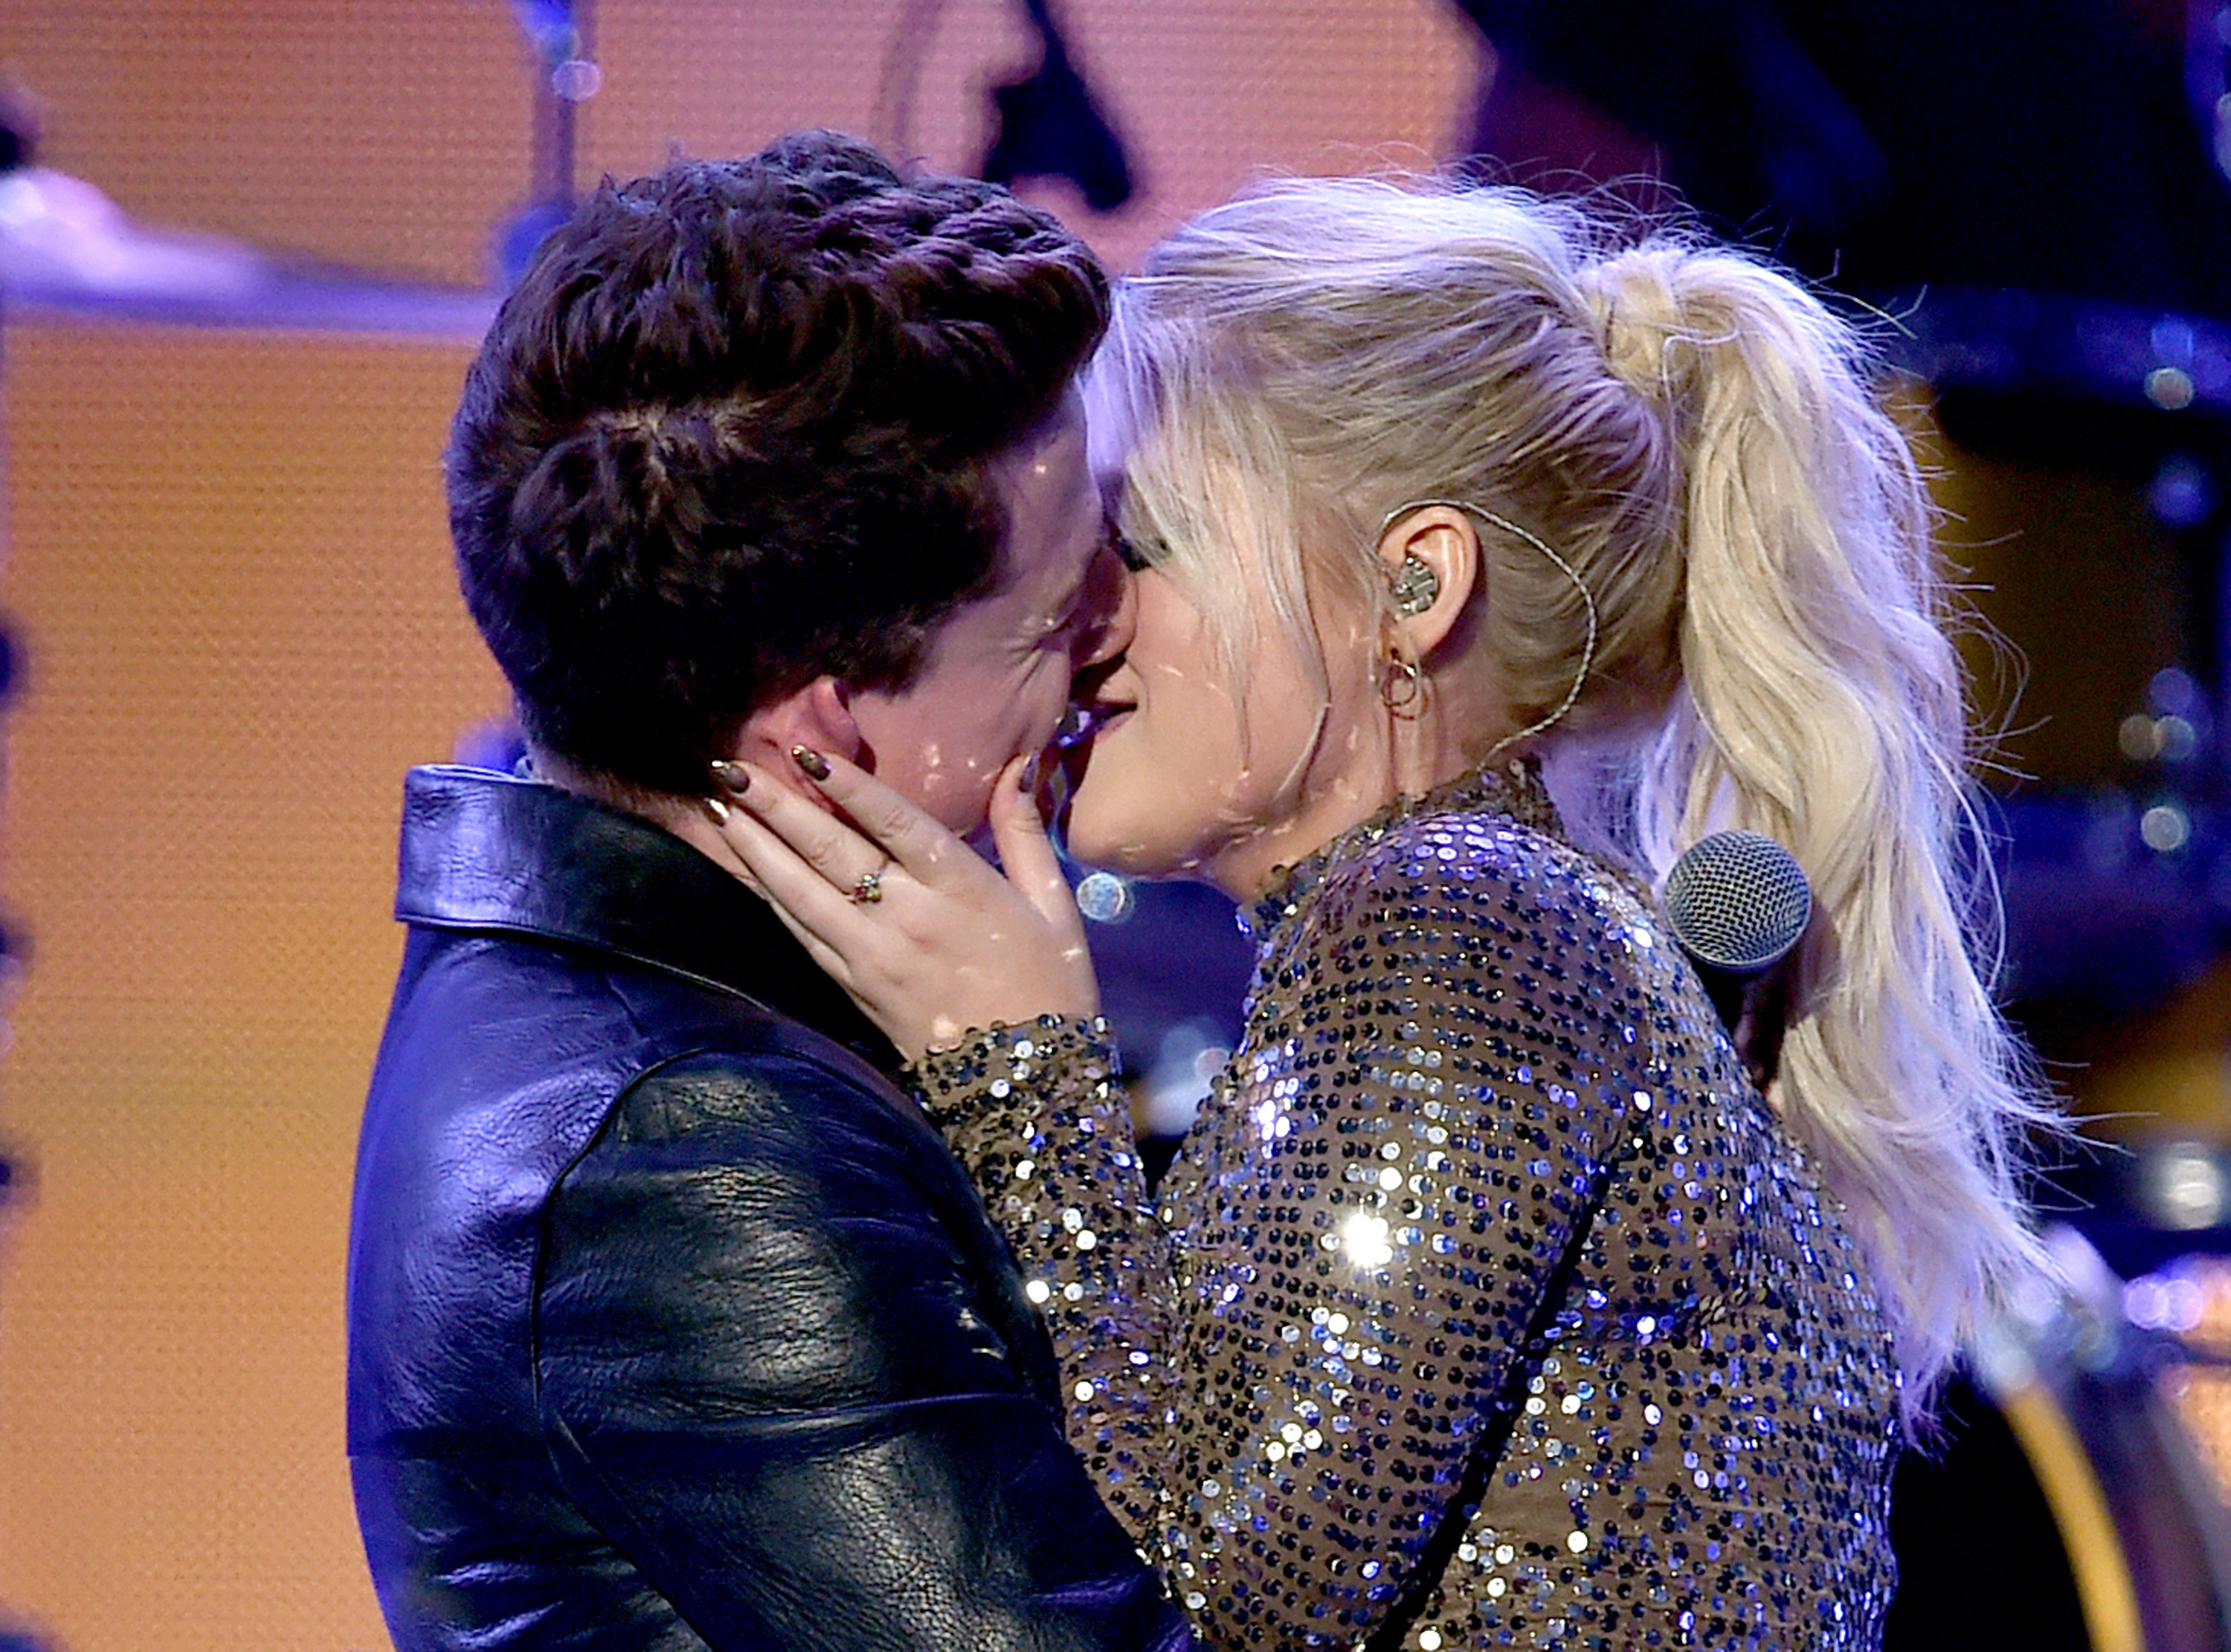 Meghan Trainor and Charlie Puth perform onstage during the 2015 American Music Awards at Microsoft Theater on Nov. 22, 2015 in Los Angeles, California. (Kevin Winter—Getty Images)